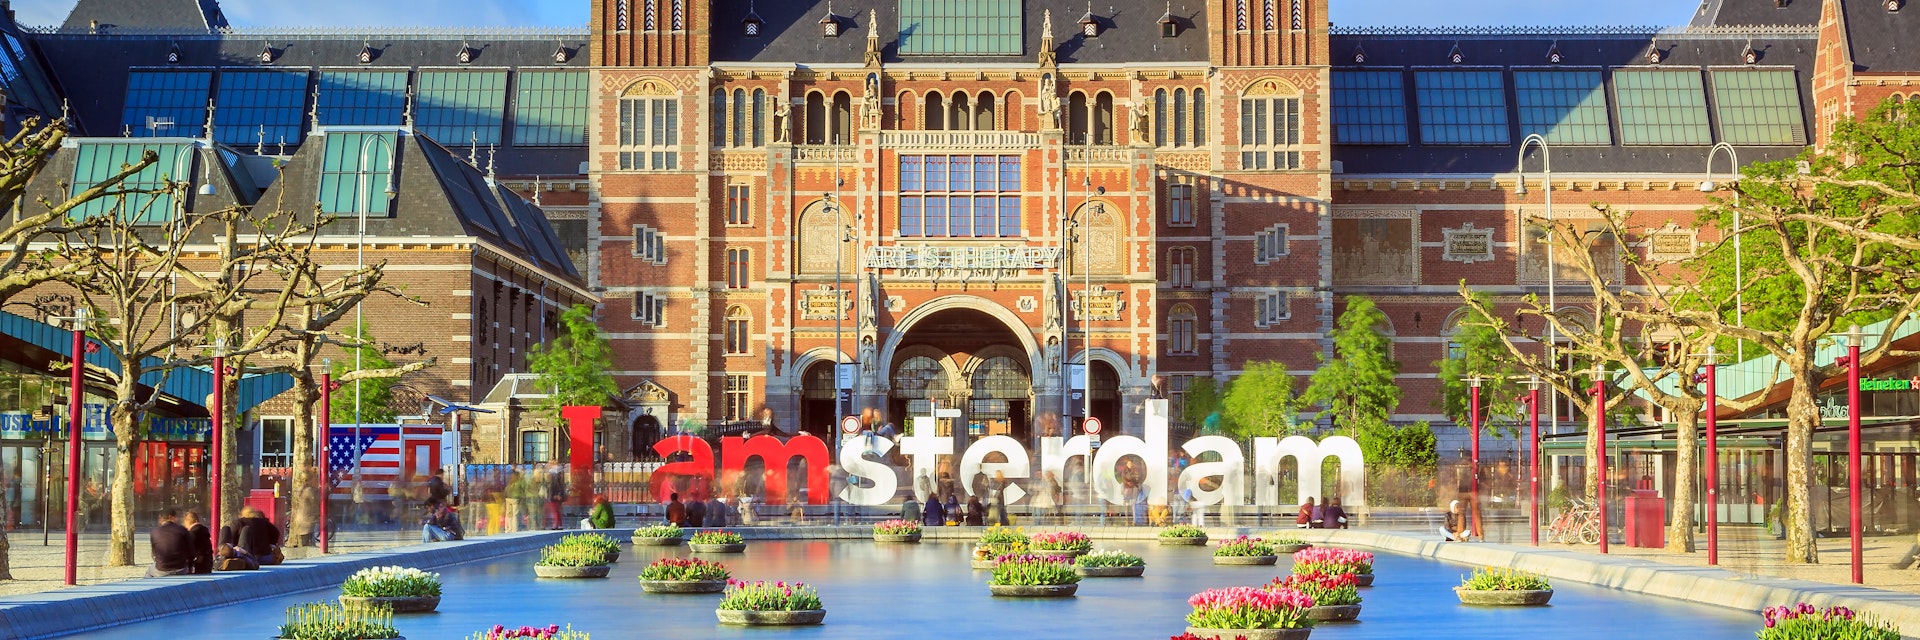 Rijksmuseum with tulips in Amsterdam..NOTE: dated image - "iamamsterdam" sign has been removed from outside museum.